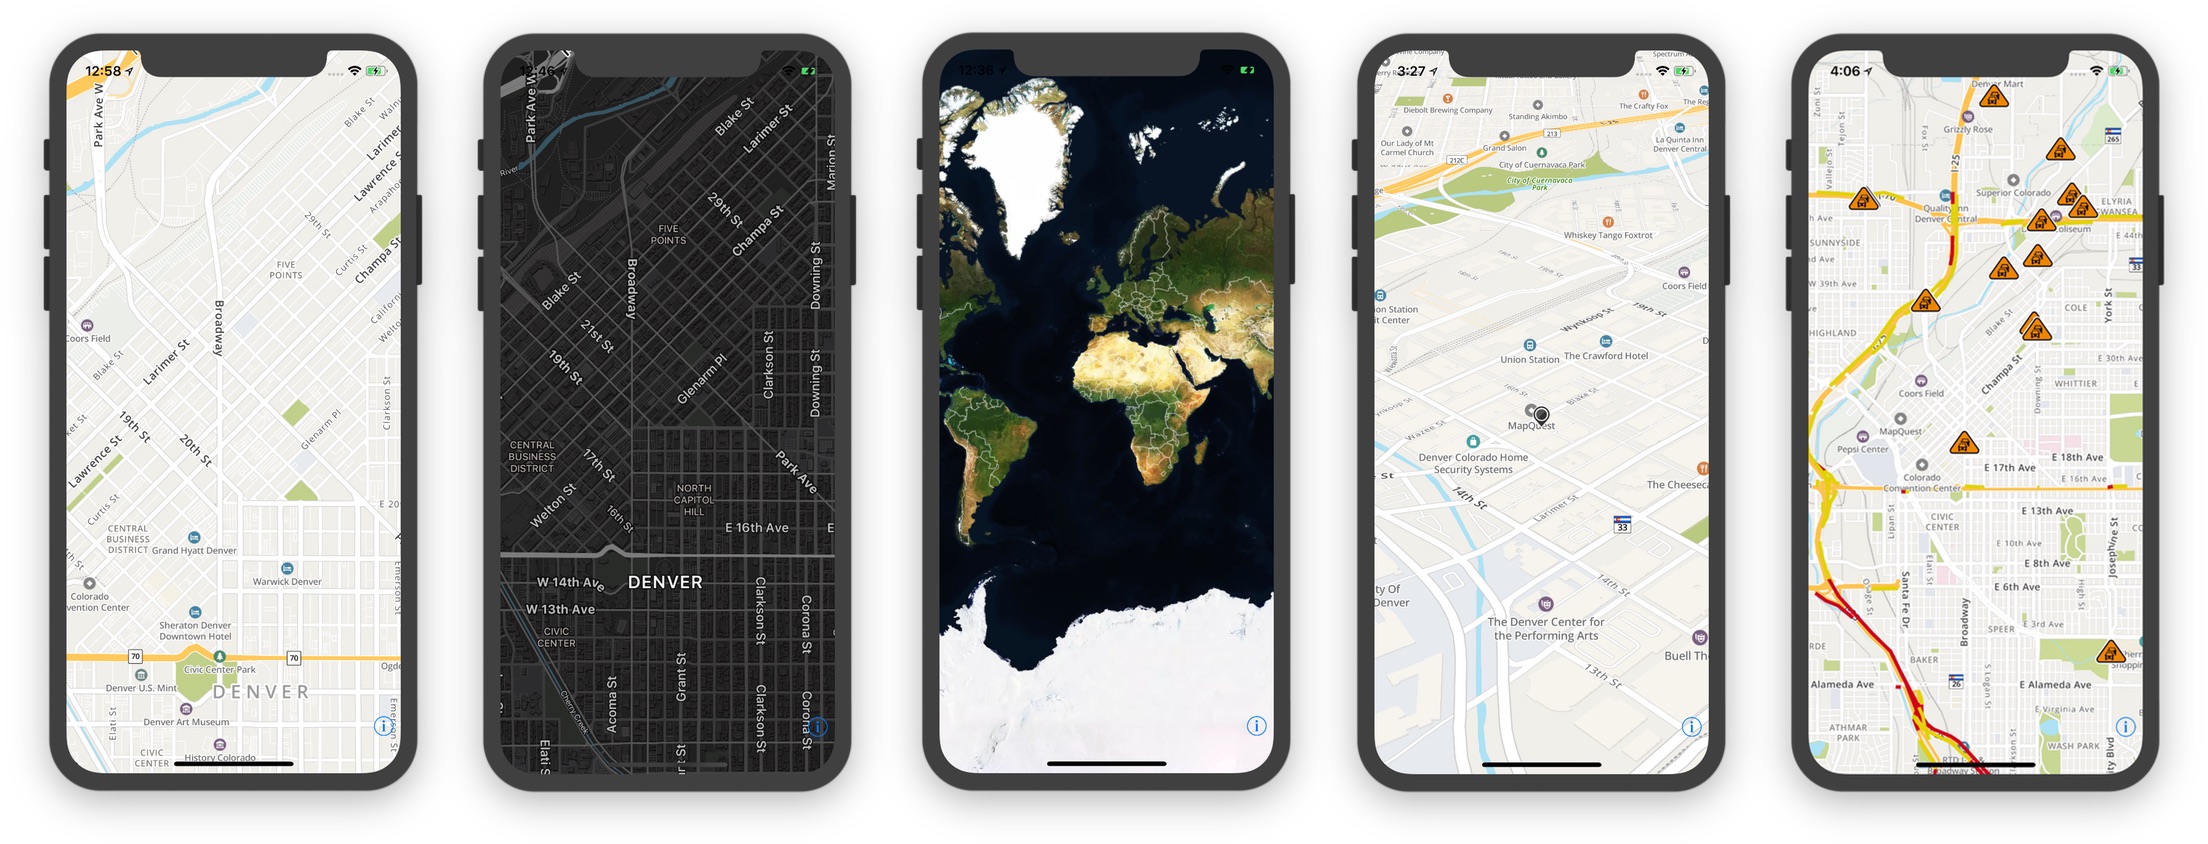 iPhones with MapQuest Maps